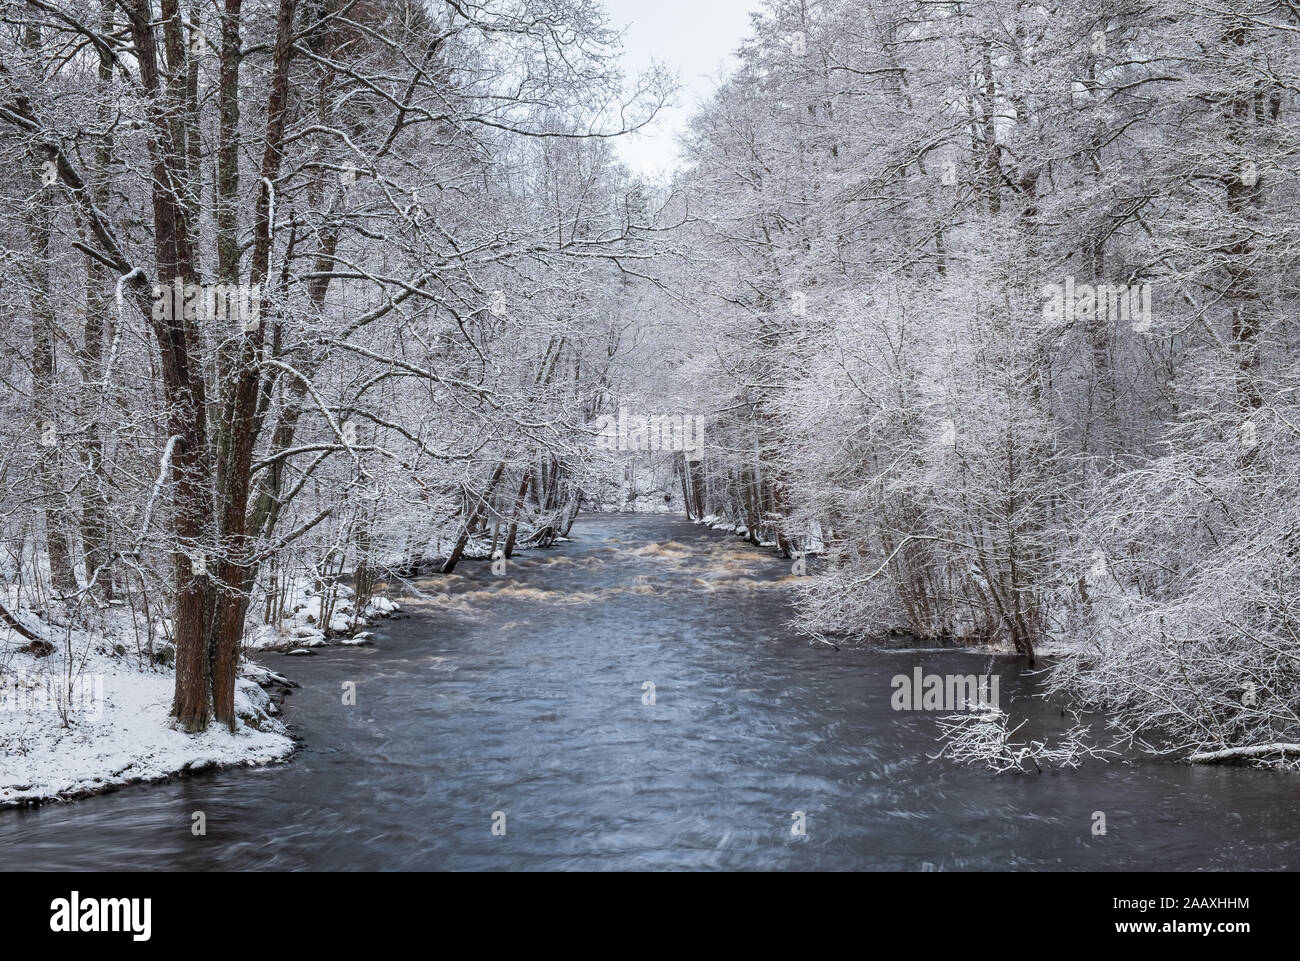 Scenic winter landscape with flowing river and morning light in Finland. Snowy trees. Stock Photo